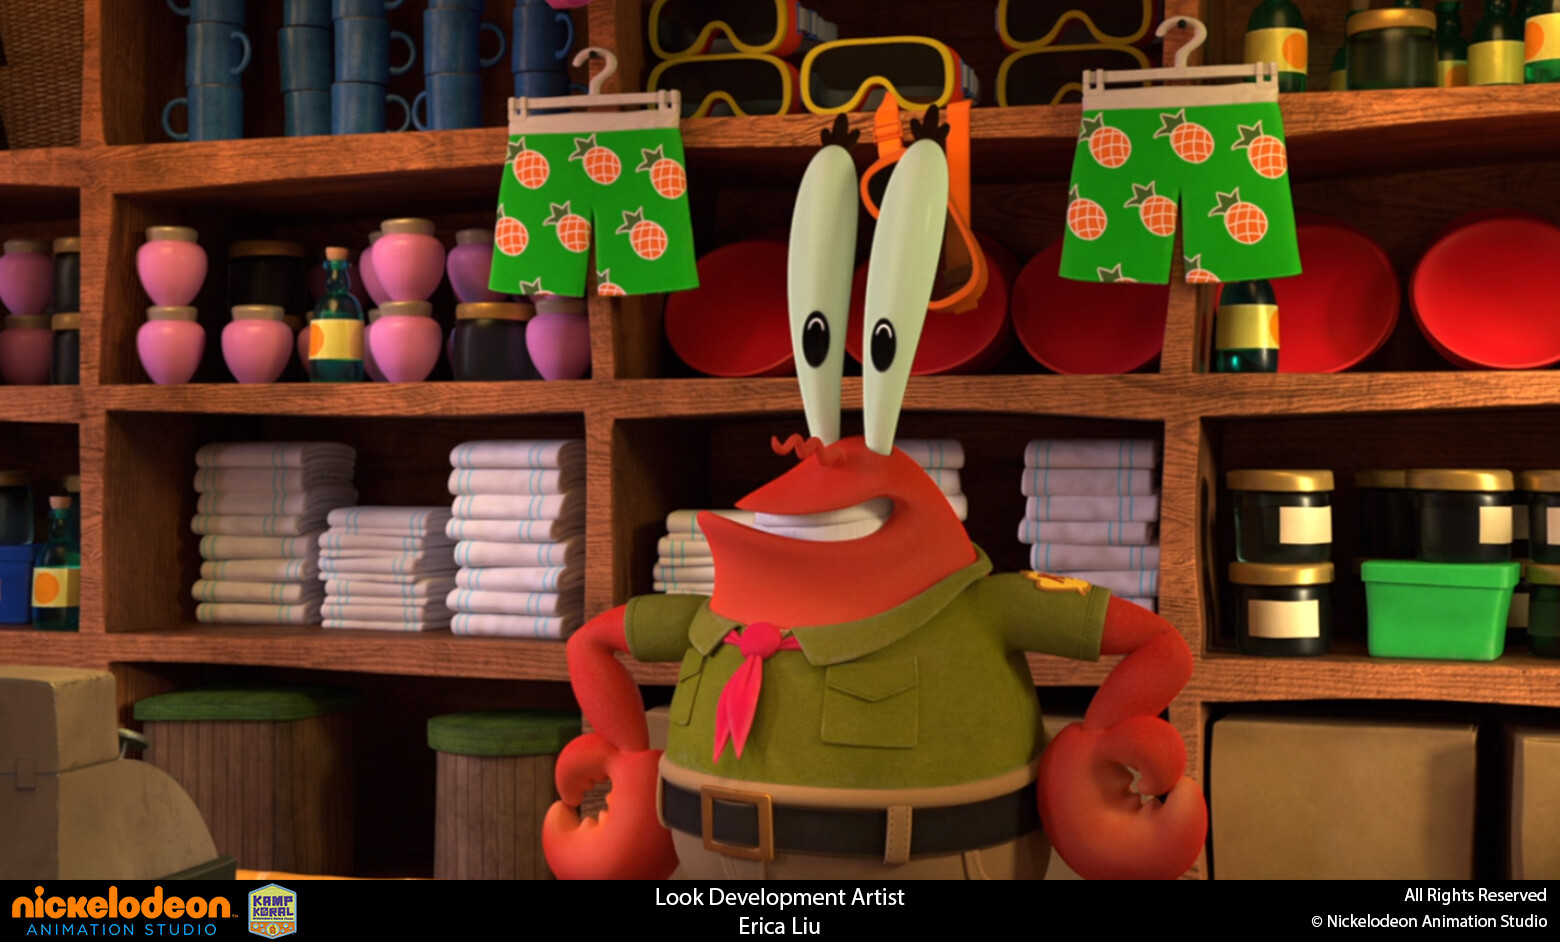 Responsible for look development and texture of Mr. Krabs